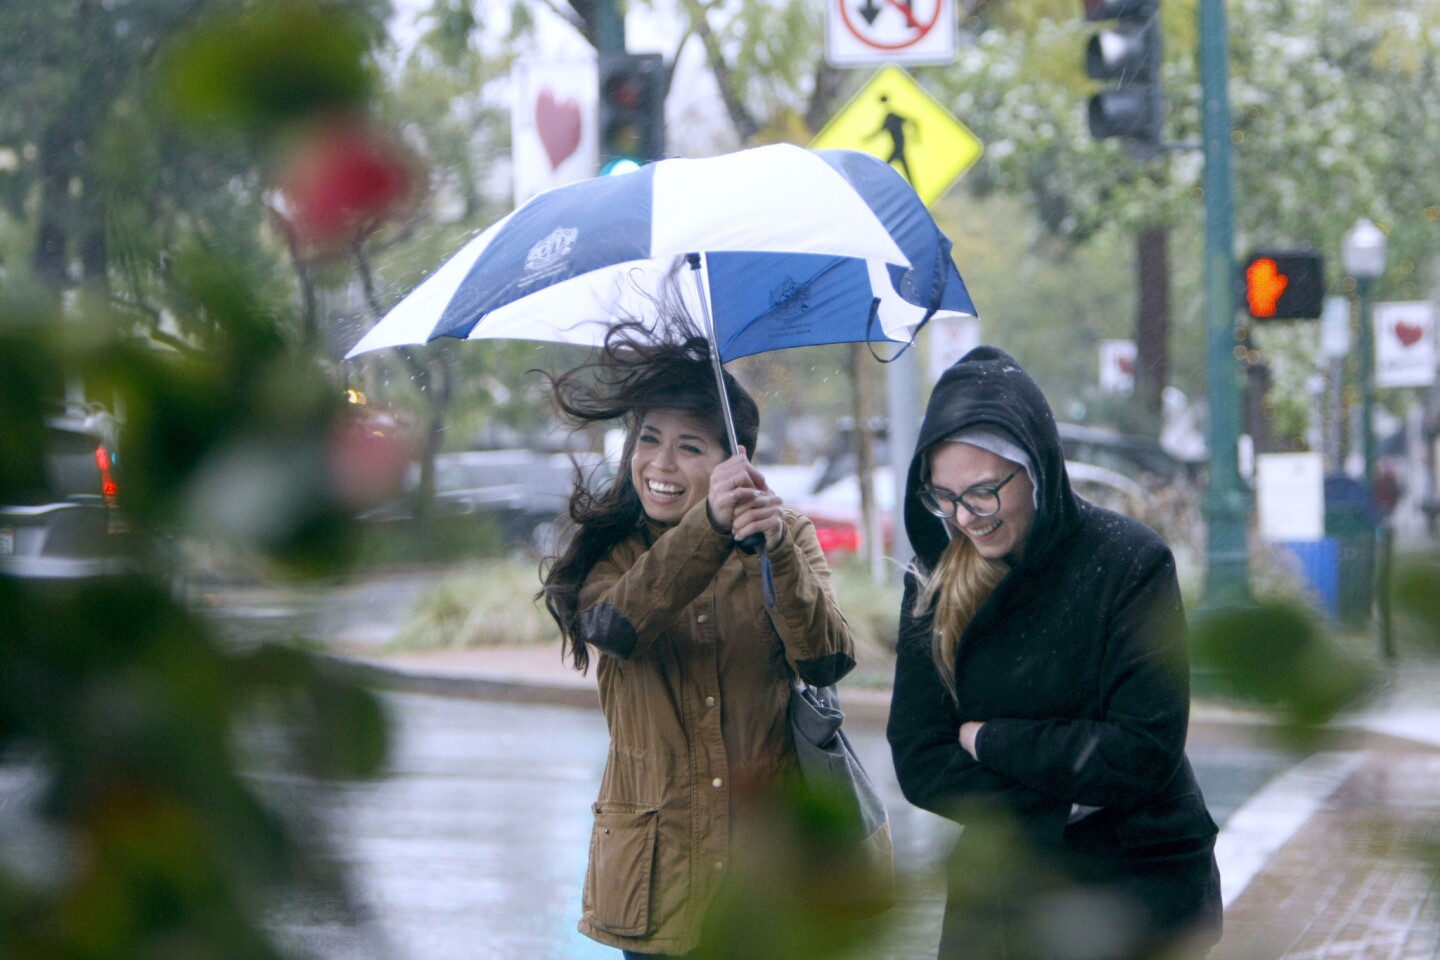 Felicia Schliewe, 31 of Highland Park, left, and Daniella Langley, 24 of Lake View Terrace, get hit by a gust of wind as they walk on a rainy afternoon on Honolulu Avenue and Ocean View Avenue in Montrose, on Friday, Feb. 17, 2017. A massive storm hit the Southland over the weekend.